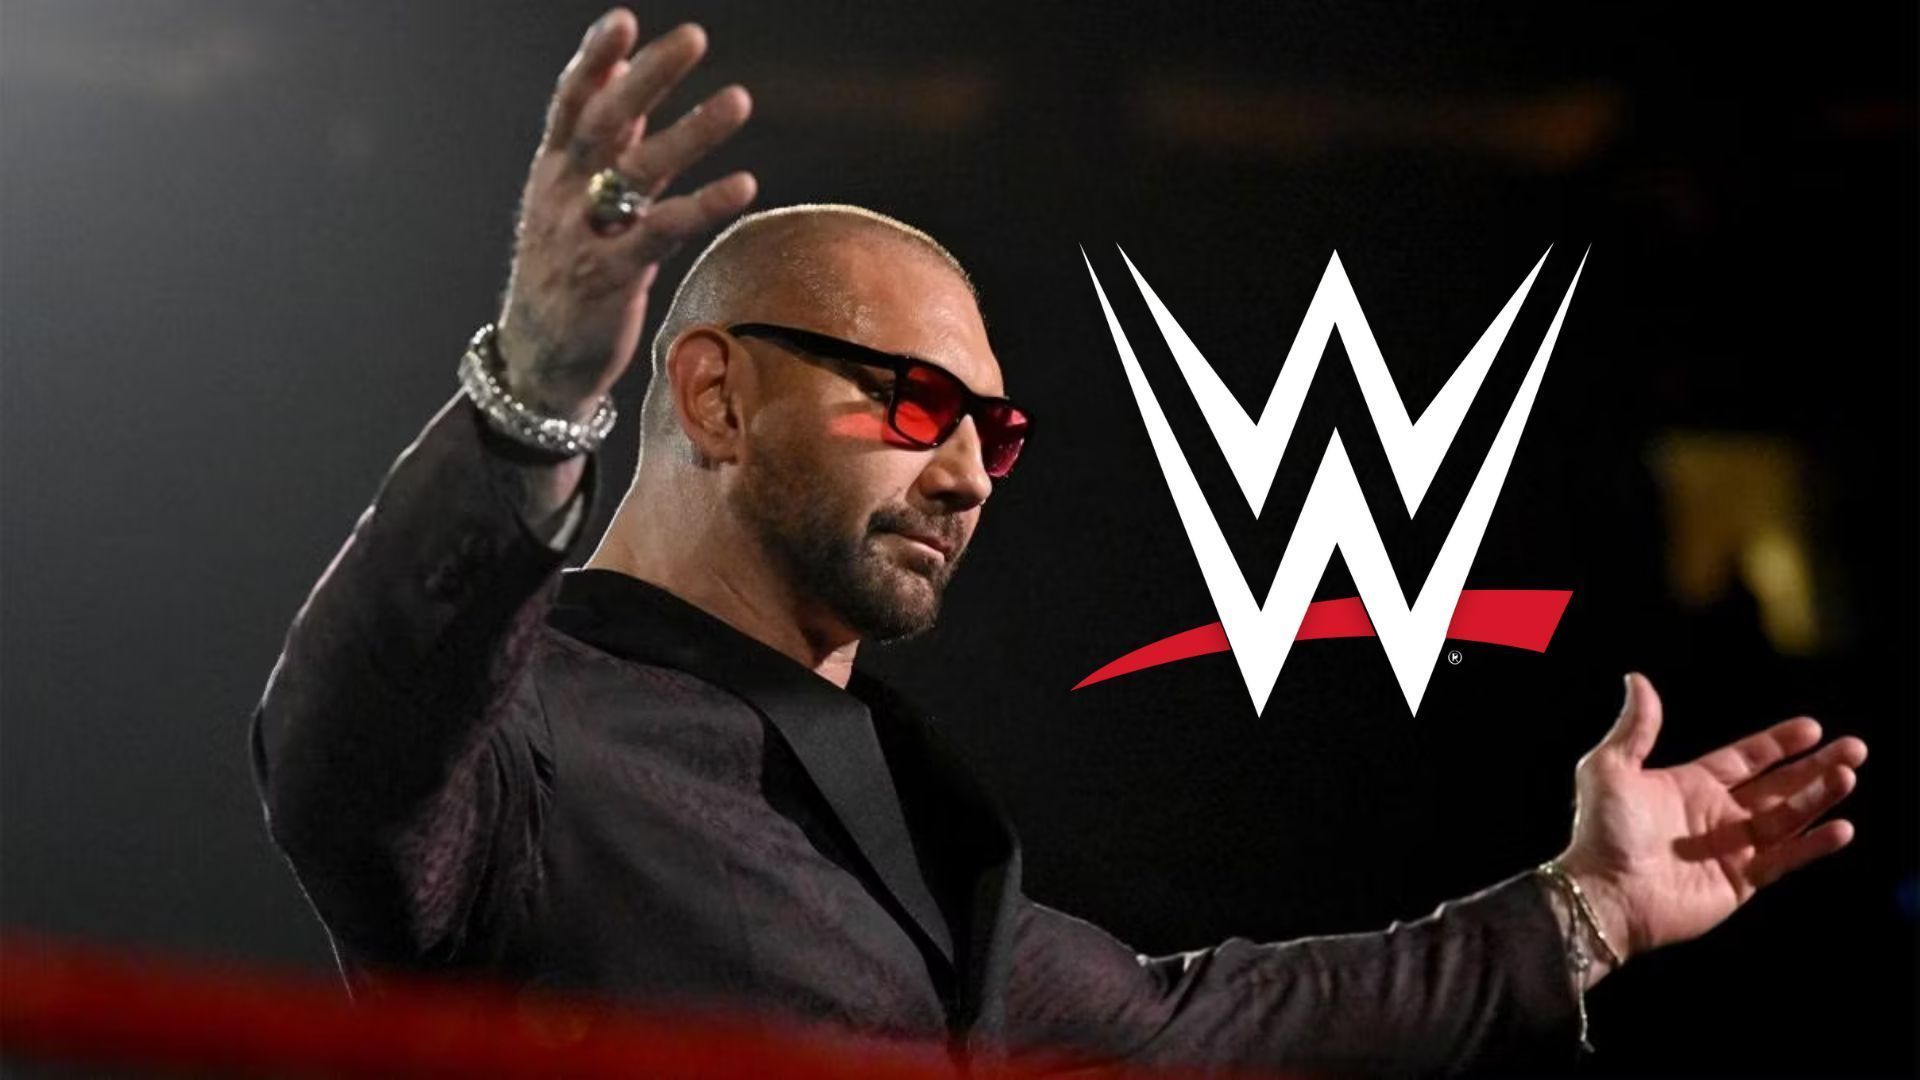 WWE legend and six-time world champion, Dave Batista.